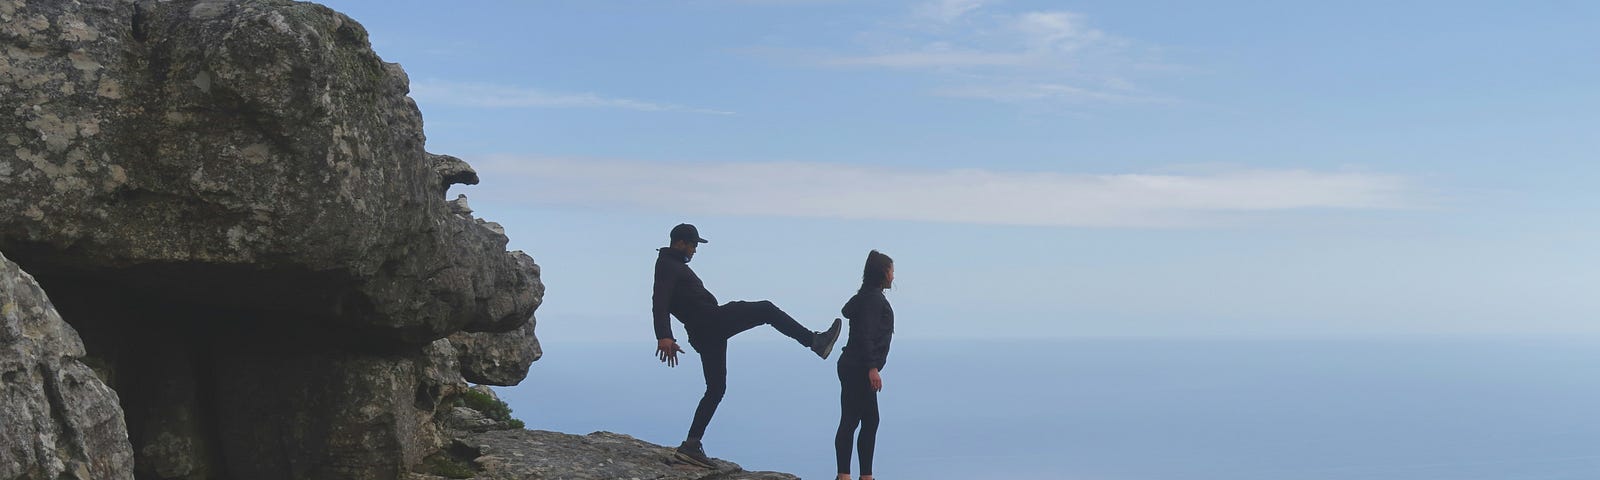 A person kicking another person from the top of the cliff